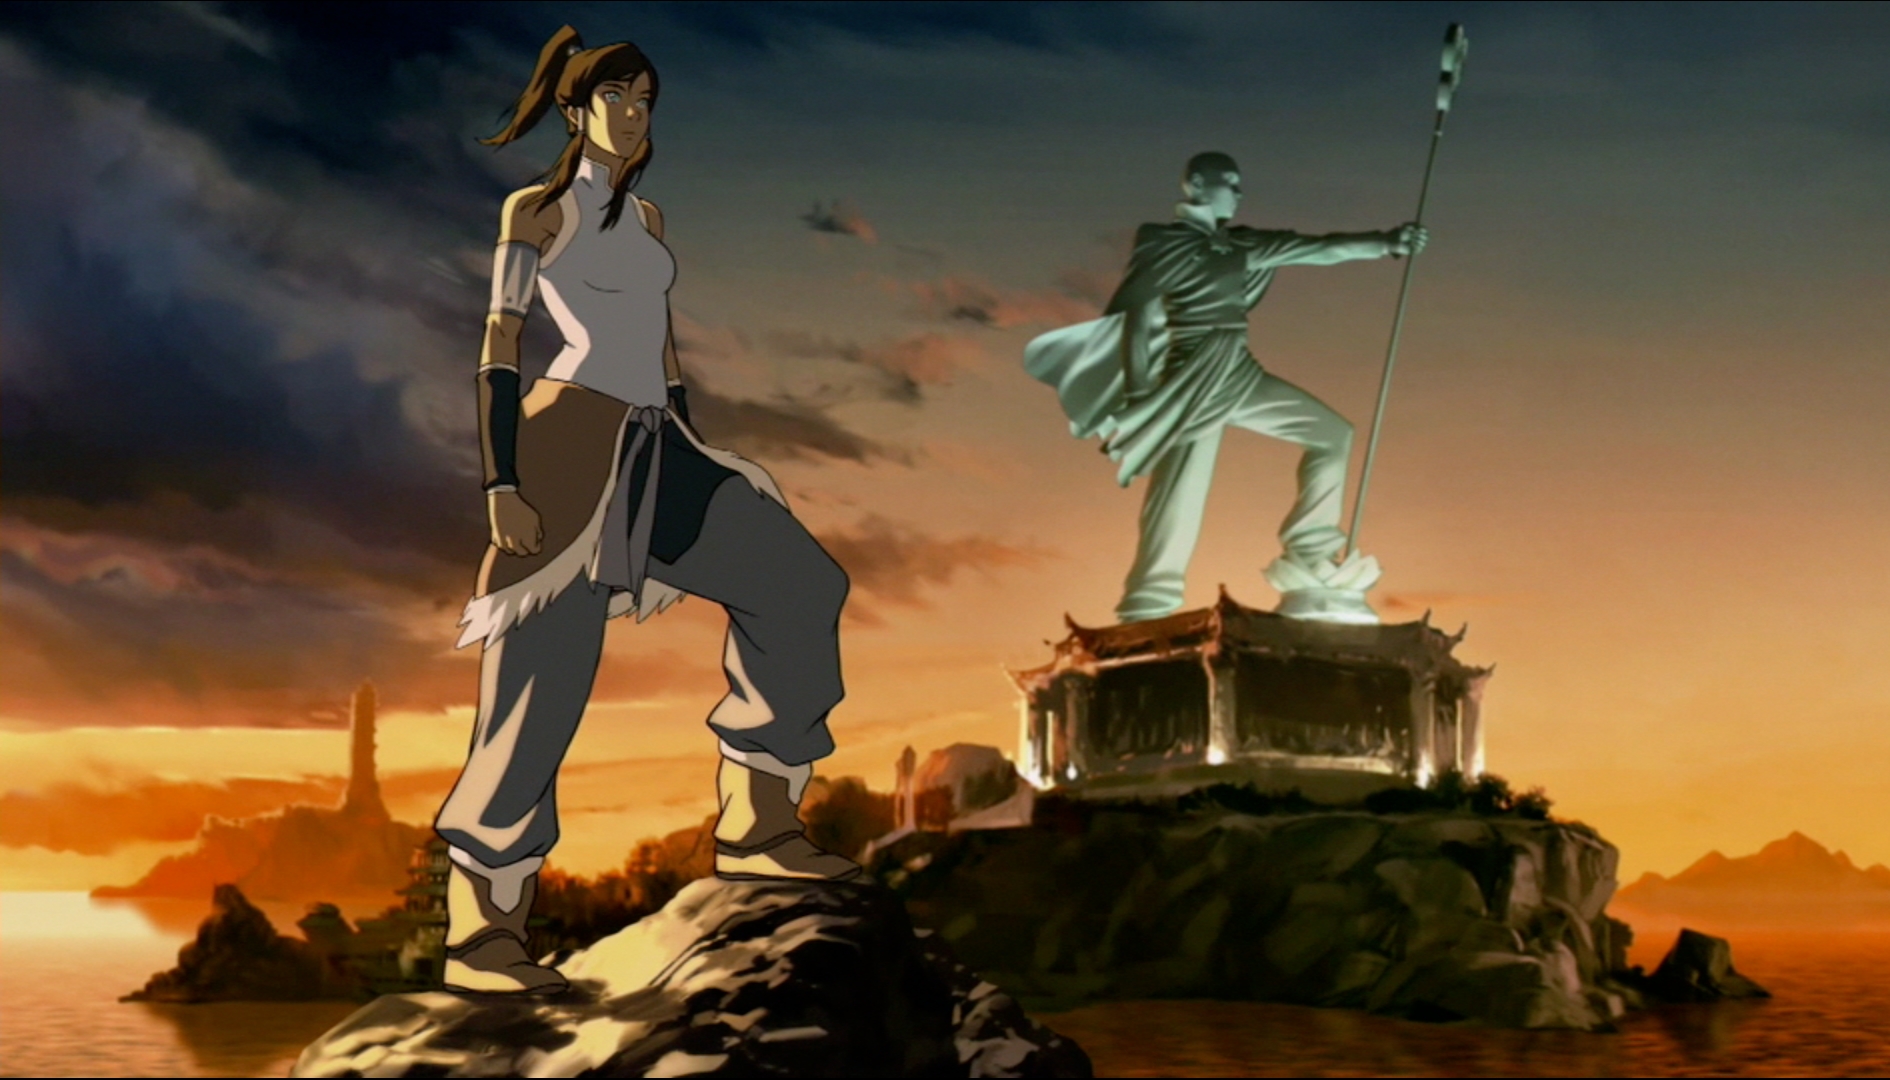 Korra pictured with Aang's statue in the background 